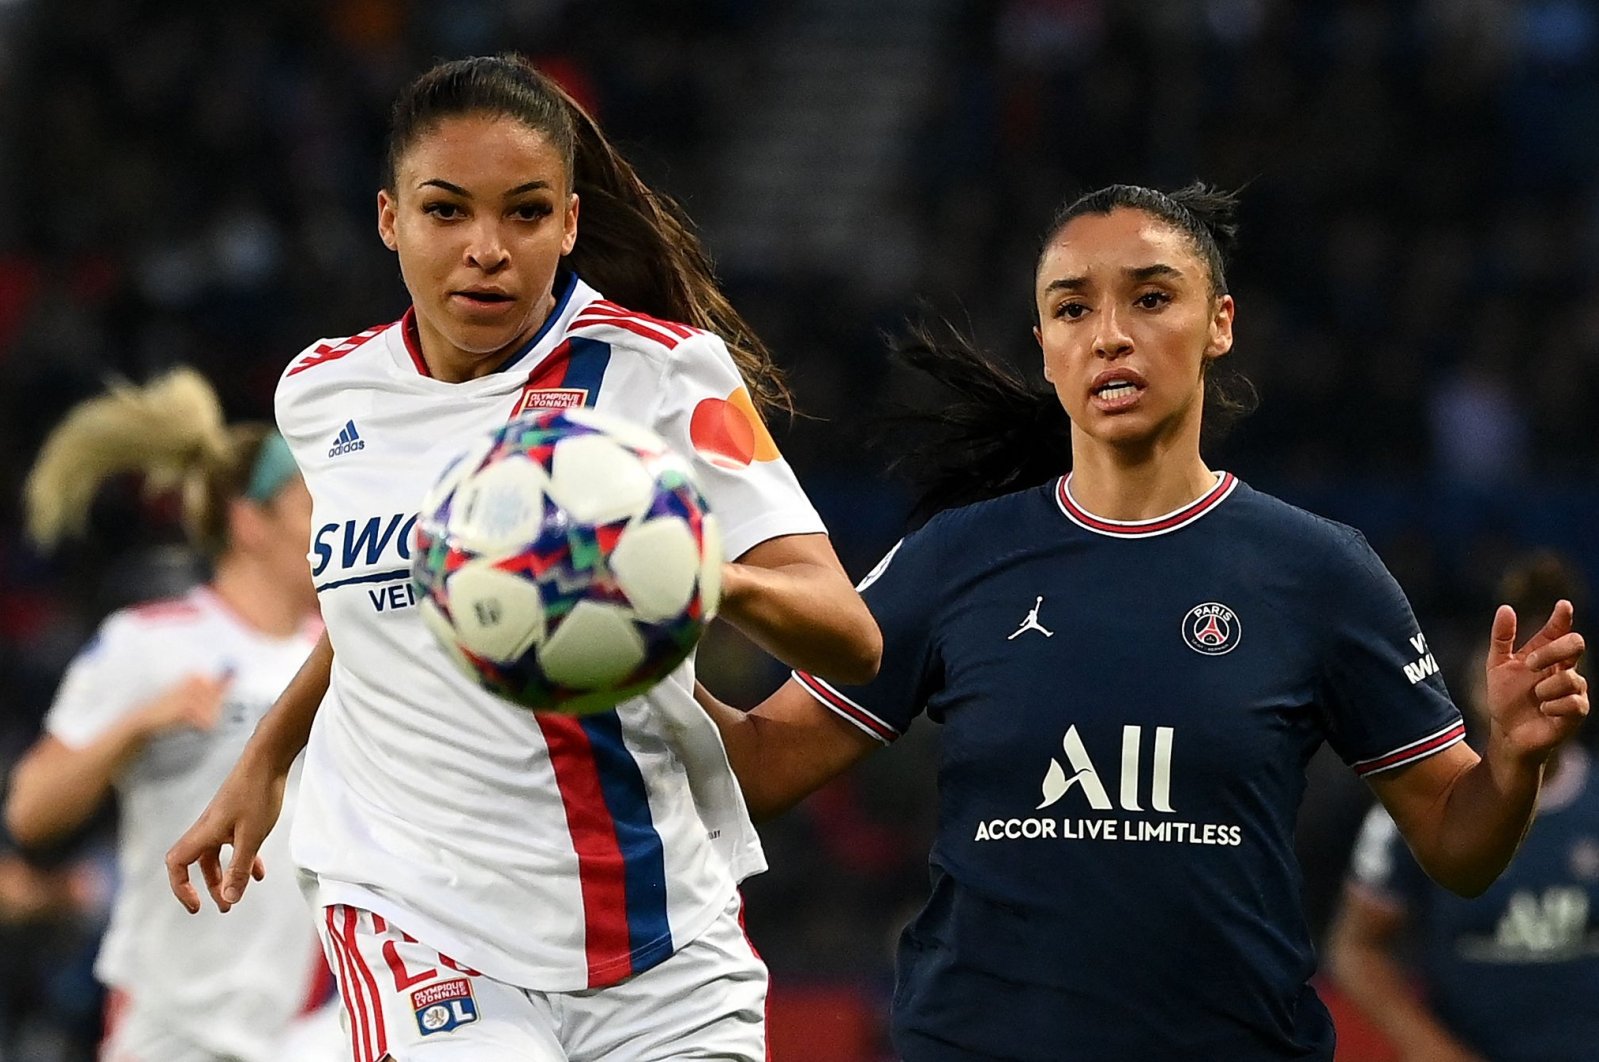 Lyon’s Delphine Cascarino (L) fights for the ball against PSG&#039;s Sakina Karchaoui, in Paris, France, April 30, 2022. (AFP PHOTO)